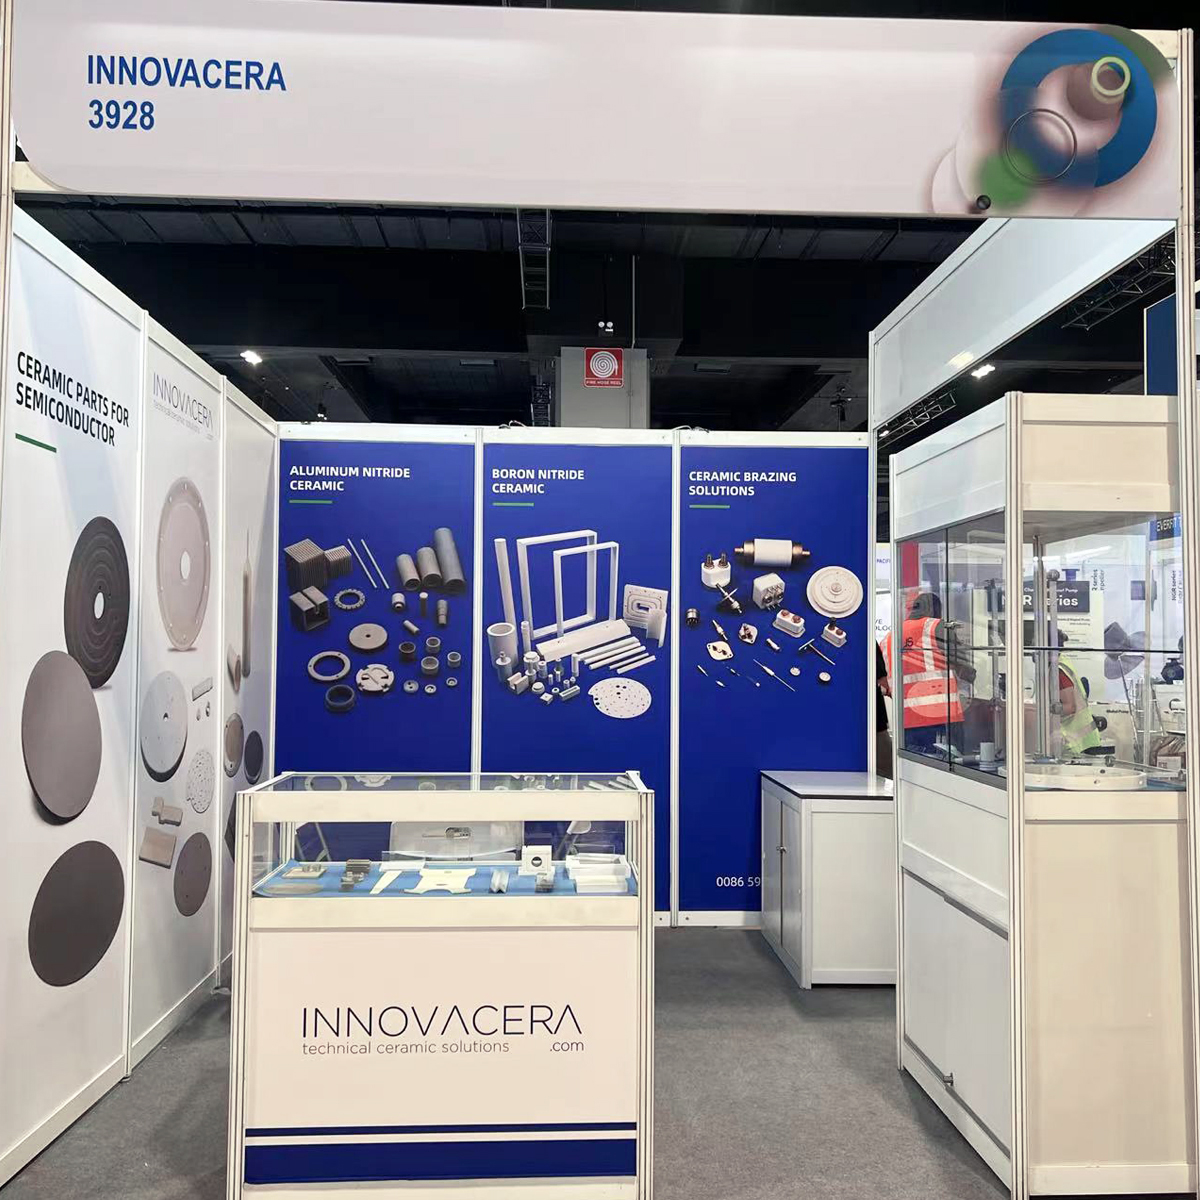 Engineered technical ceramics are widely used in semiconductor manufacturing process due to their high temperature stability,electrical insulation,corrosion resistance and excellent mechanical properties. INNOVACERA ultra-pure ceramics are used in the whole cycle semiconductor manufacturing process including wafer manufacturing,device manufacturing, and packaging.  As the semiconductor industry continues to evolve rapidly, the exhibition provides an essential chance for industry stakeholders to stay ahead of technological advancements and market trends. Whether you're an industry veteran or a newcomer, the event offers unparalleled opportunities to gain insights, network with peers, and explore the future of the semiconductor landscape. This event is essential for driving the growth and development of the semiconductor ecosystem.  For more information about Innovacera product and exhibition arrange, welcome to contact us at sales@innovacera.com.